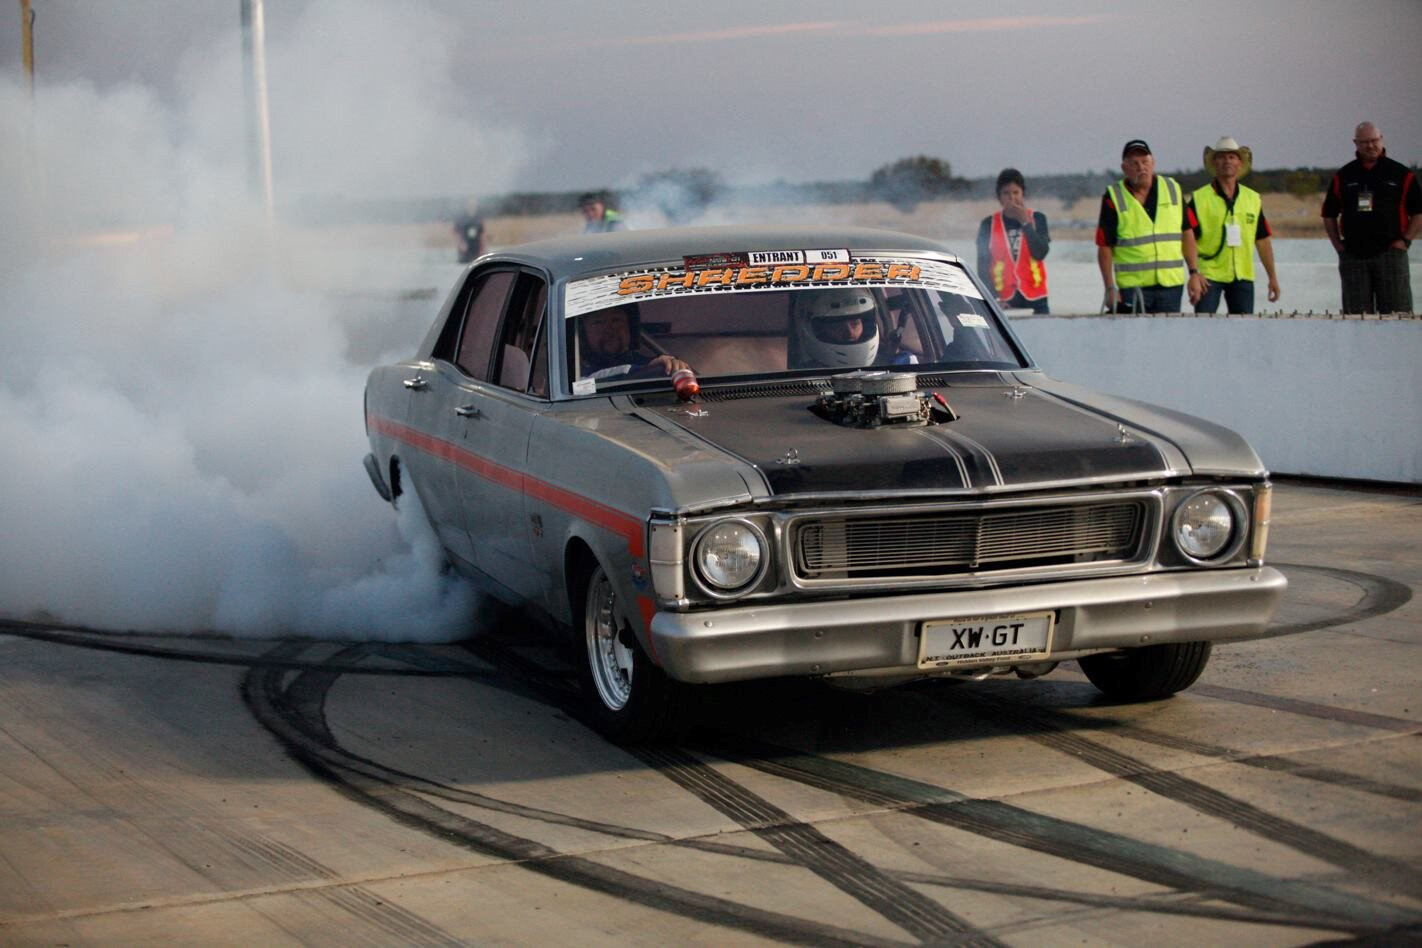 VIDEO: RED CENTRE NATS SATURDAY BURNOUT QUALIFYING